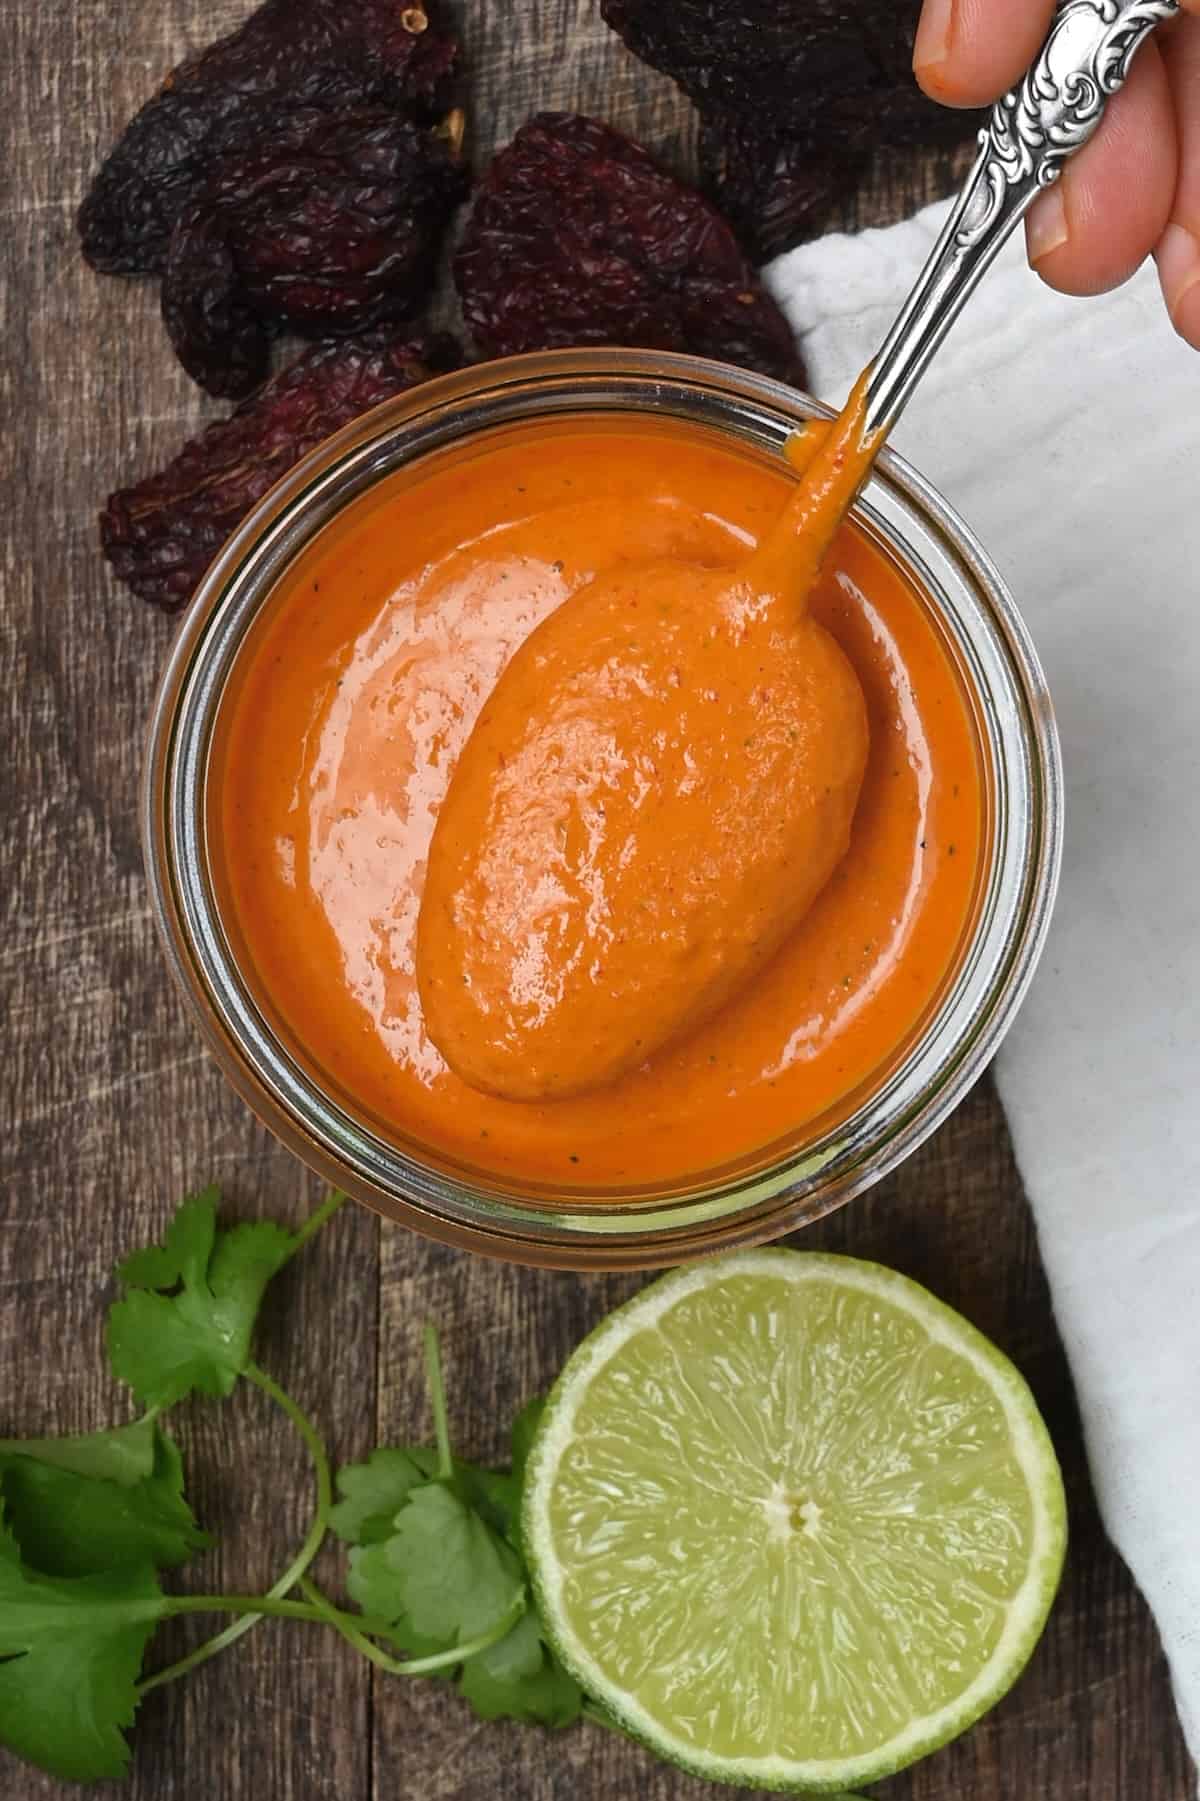 Homemade chipotle sauce in a jar